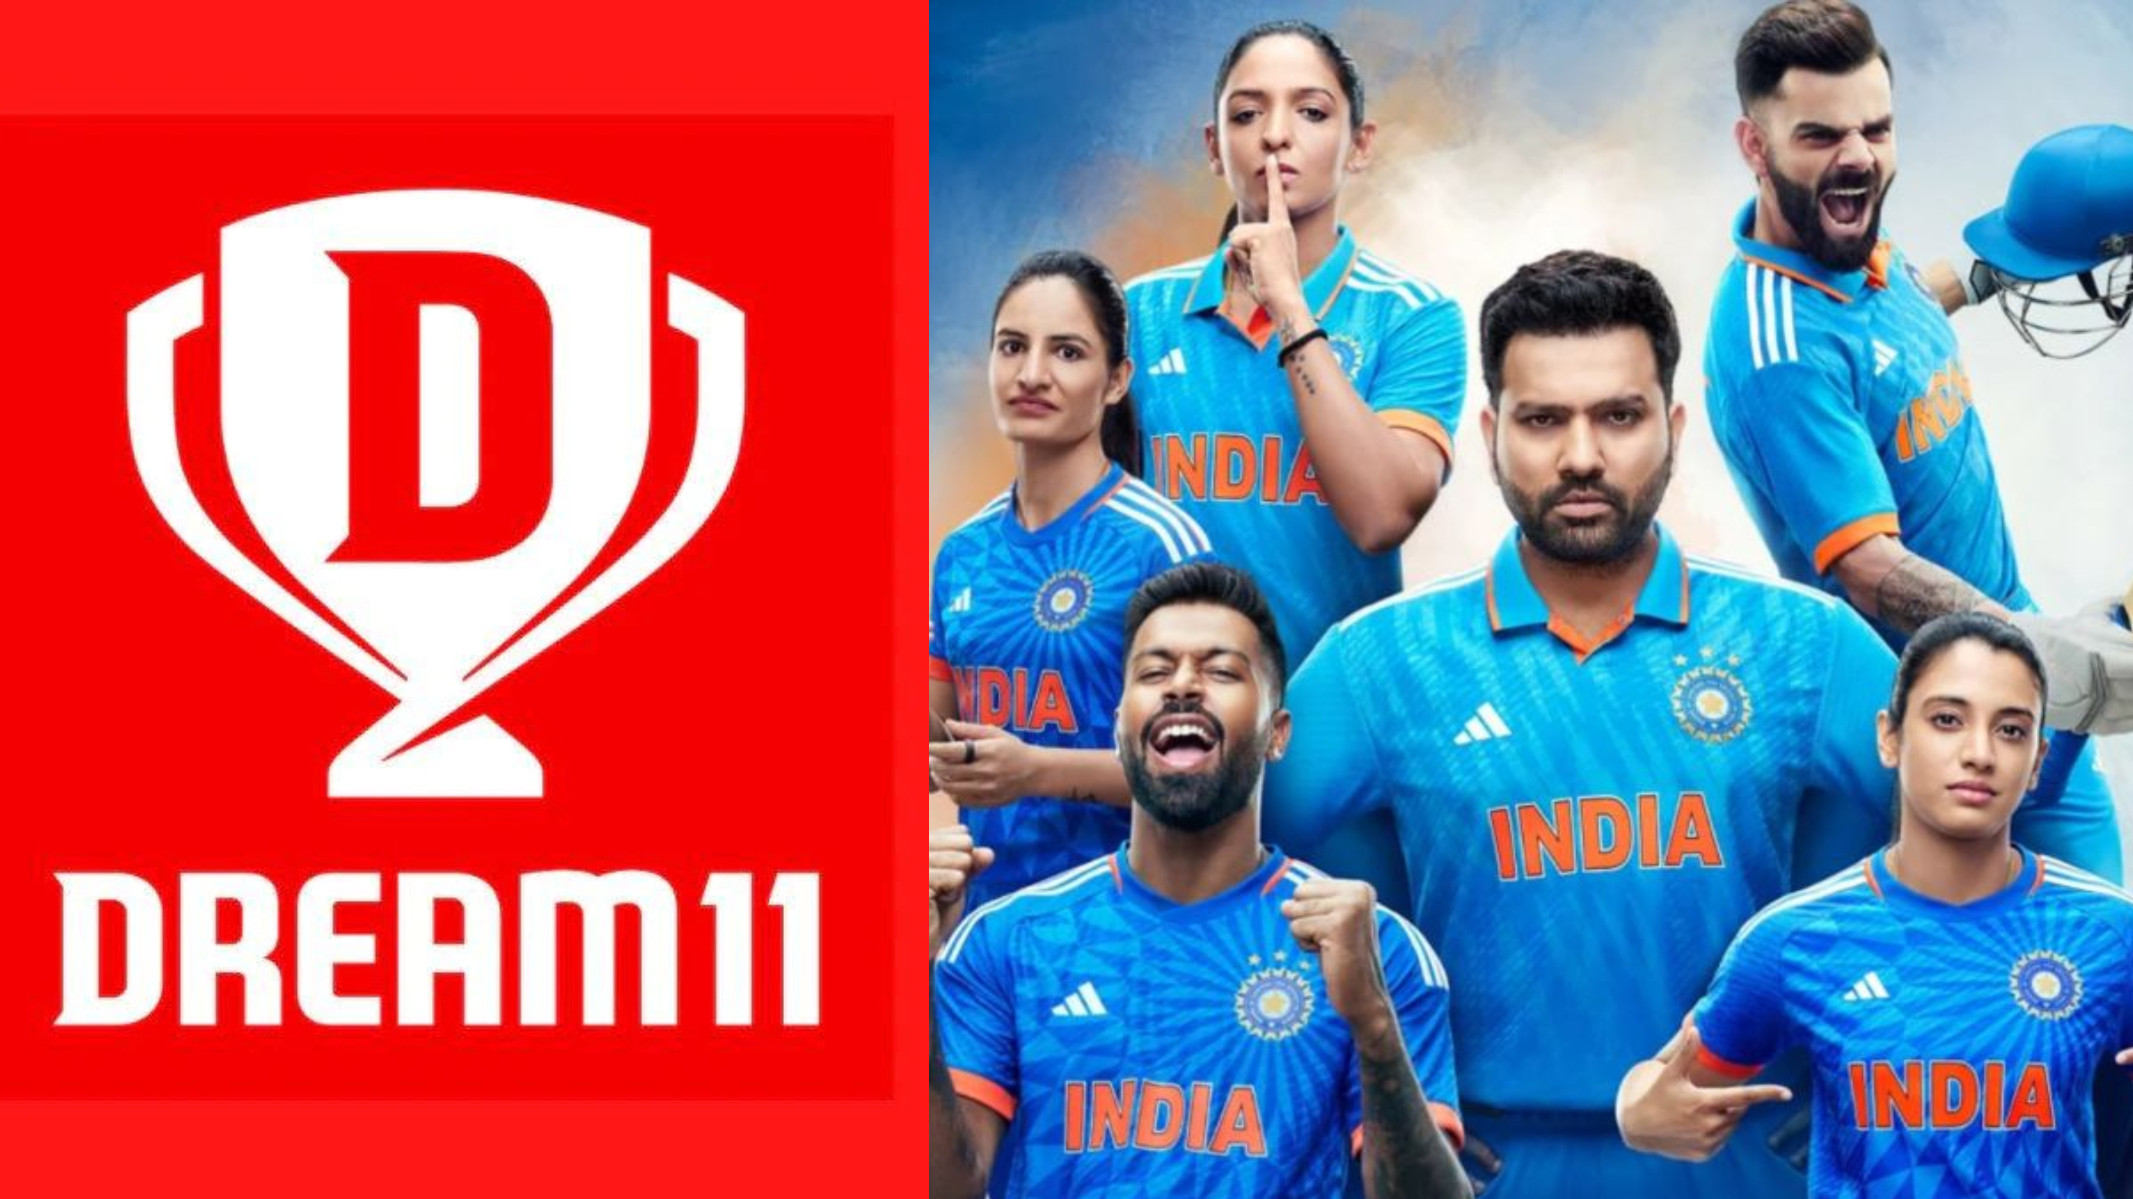 Dream11 set to be Team India’s new jersey sponsor- Report  